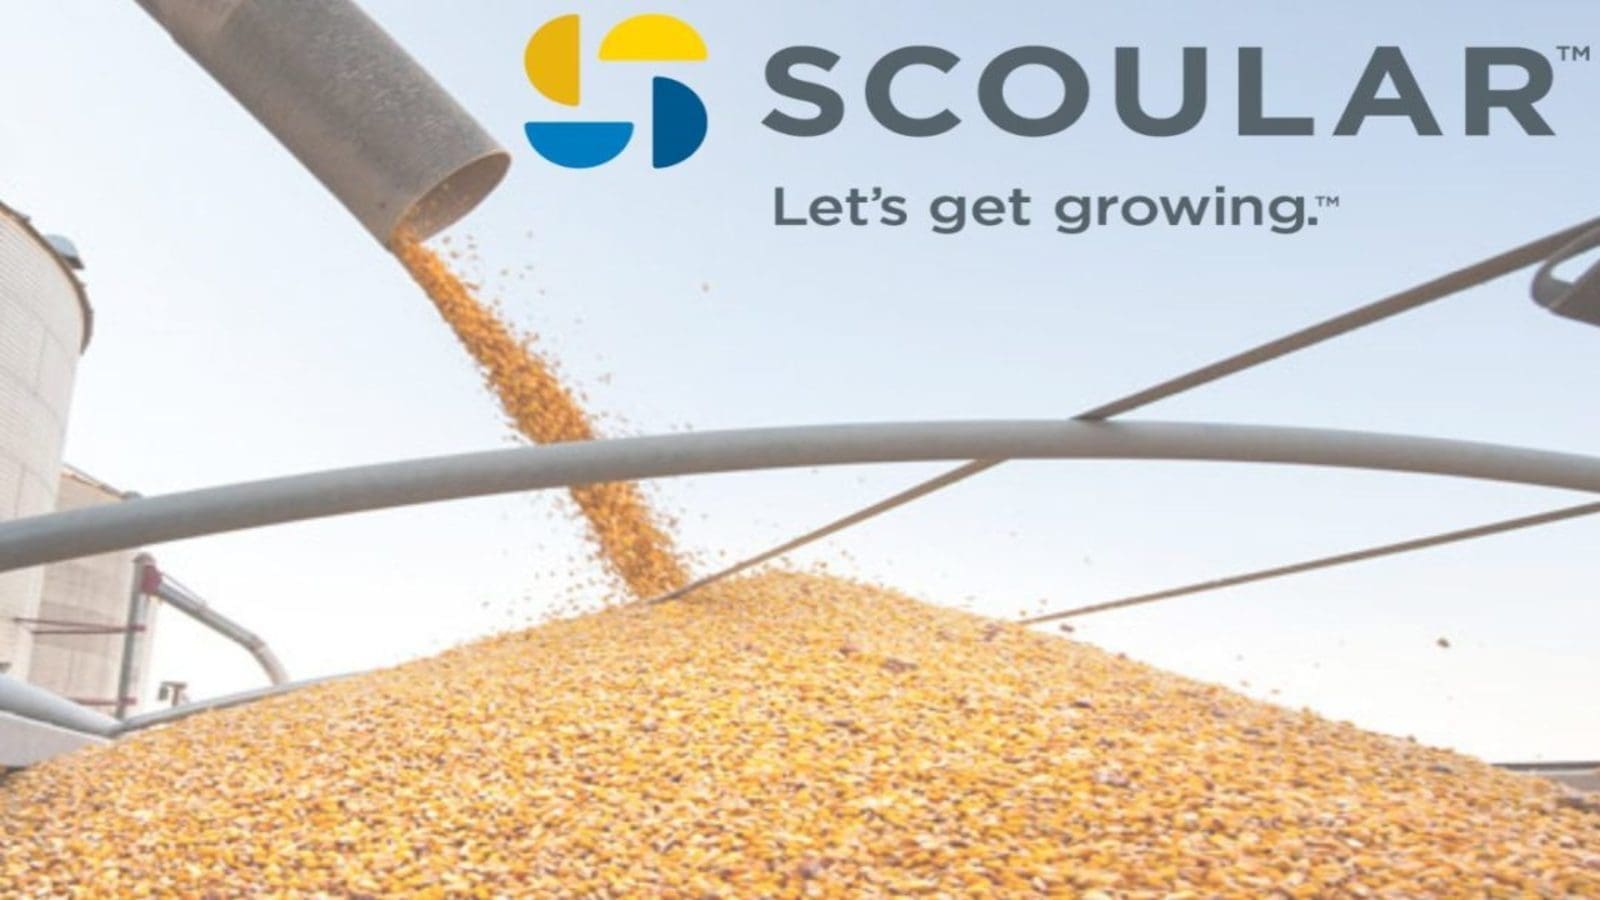 Scoular’s third Annual Sustainability Report highlights strides in carbon savings and responsible sourcing